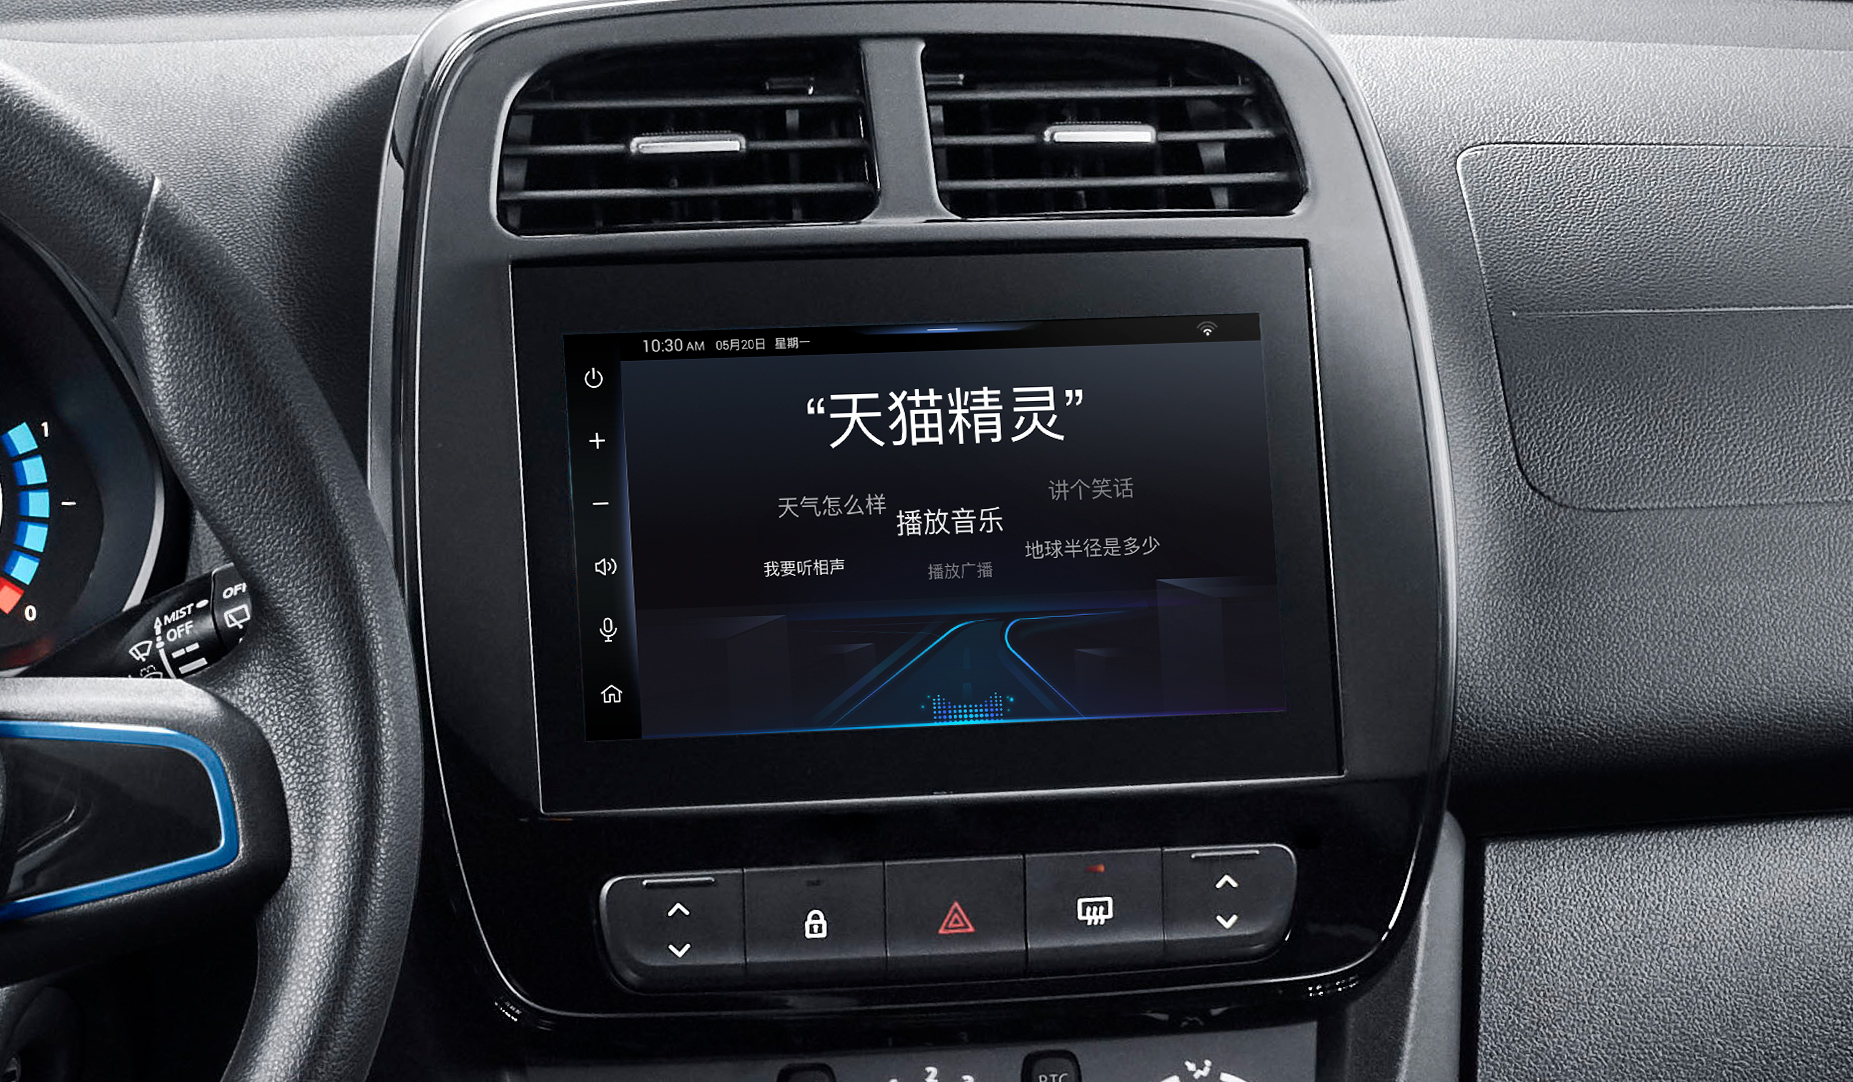 Alibaba is adding smart speakers in Audi, Renault and Honda cars to improve car-human interaction